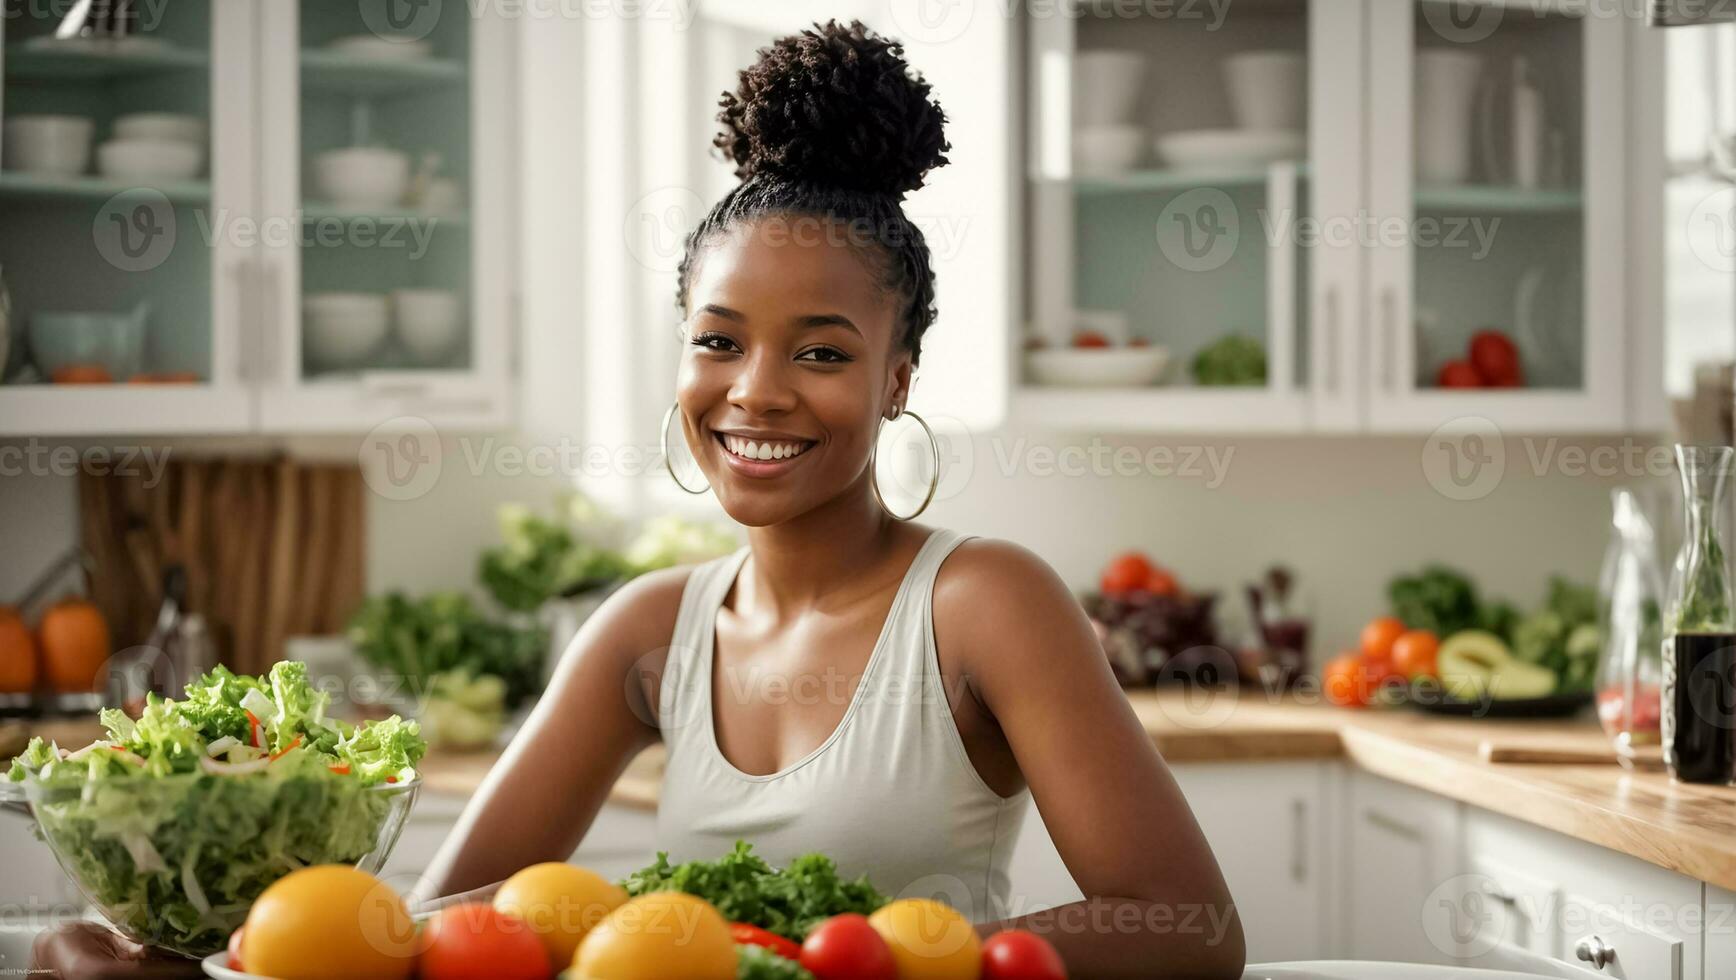 African Woman Cooking Stock Photos, Images and Backgrounds for Free Download